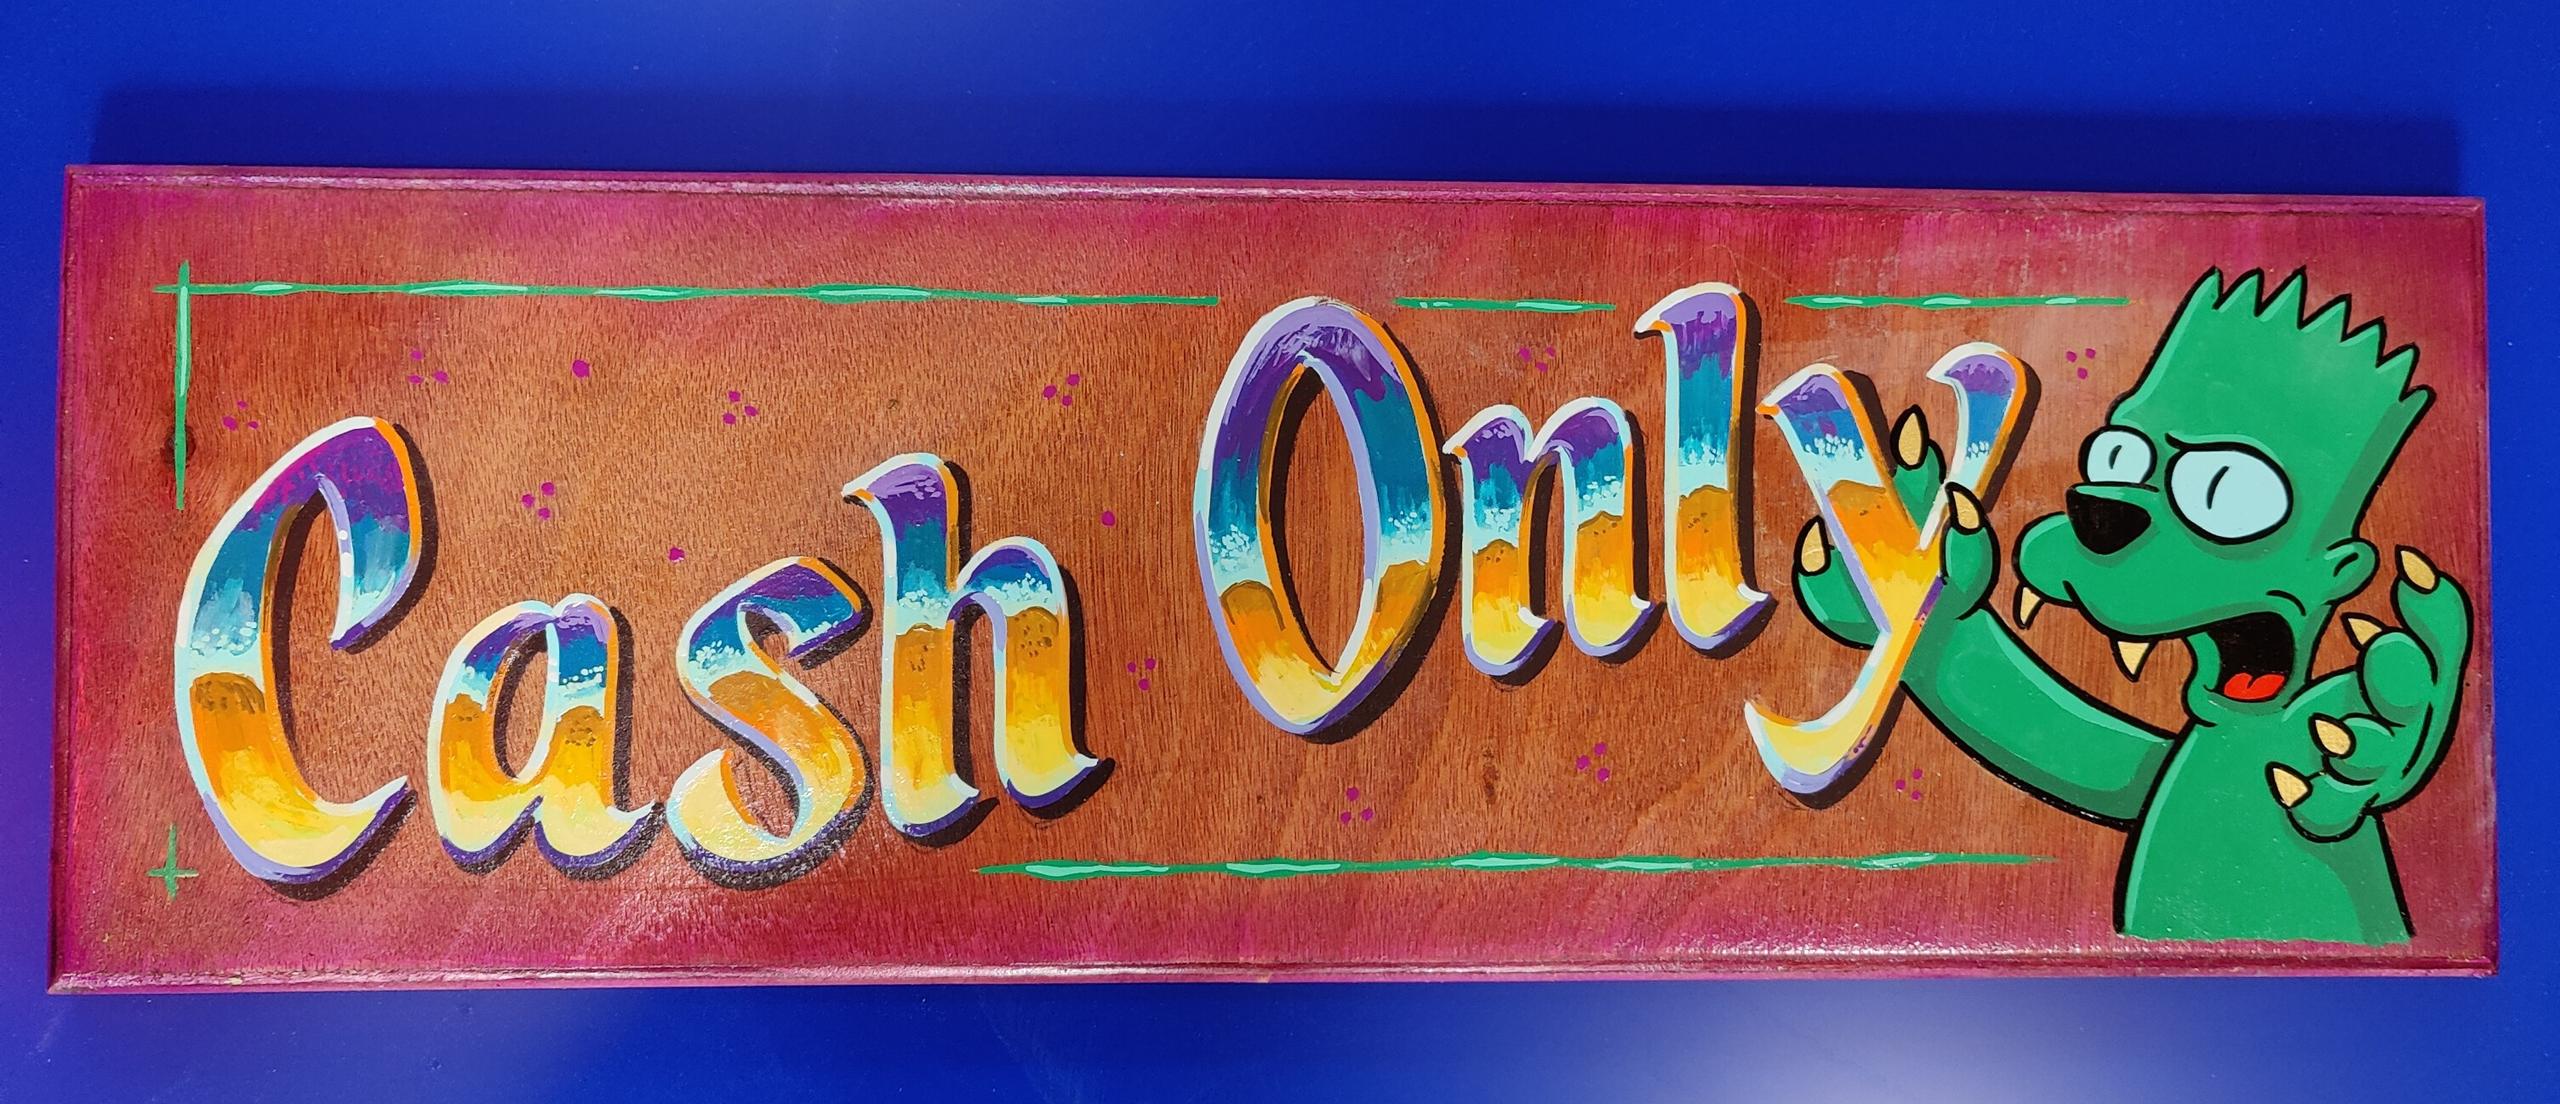 CASH ONLY- Enamel and gold leaf painted panel